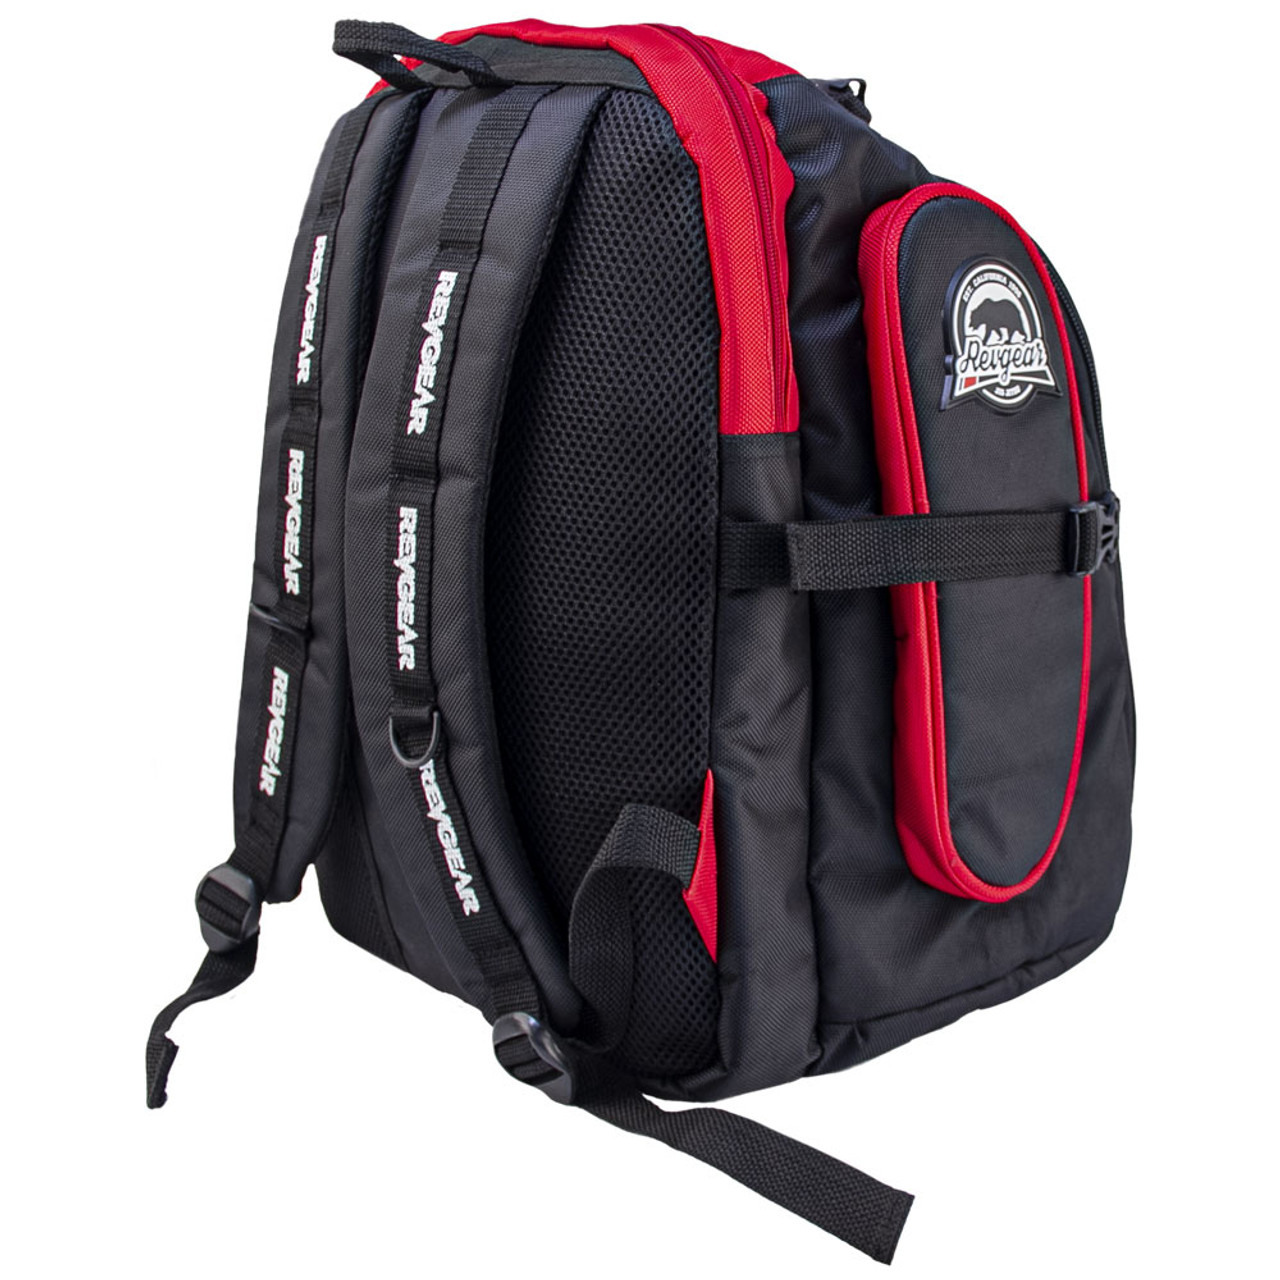 Top-selling revgear Travel Locker Urban - The Mini-Beast - The Ultimate  Martial Arts Backpack products are in high demand with 70%